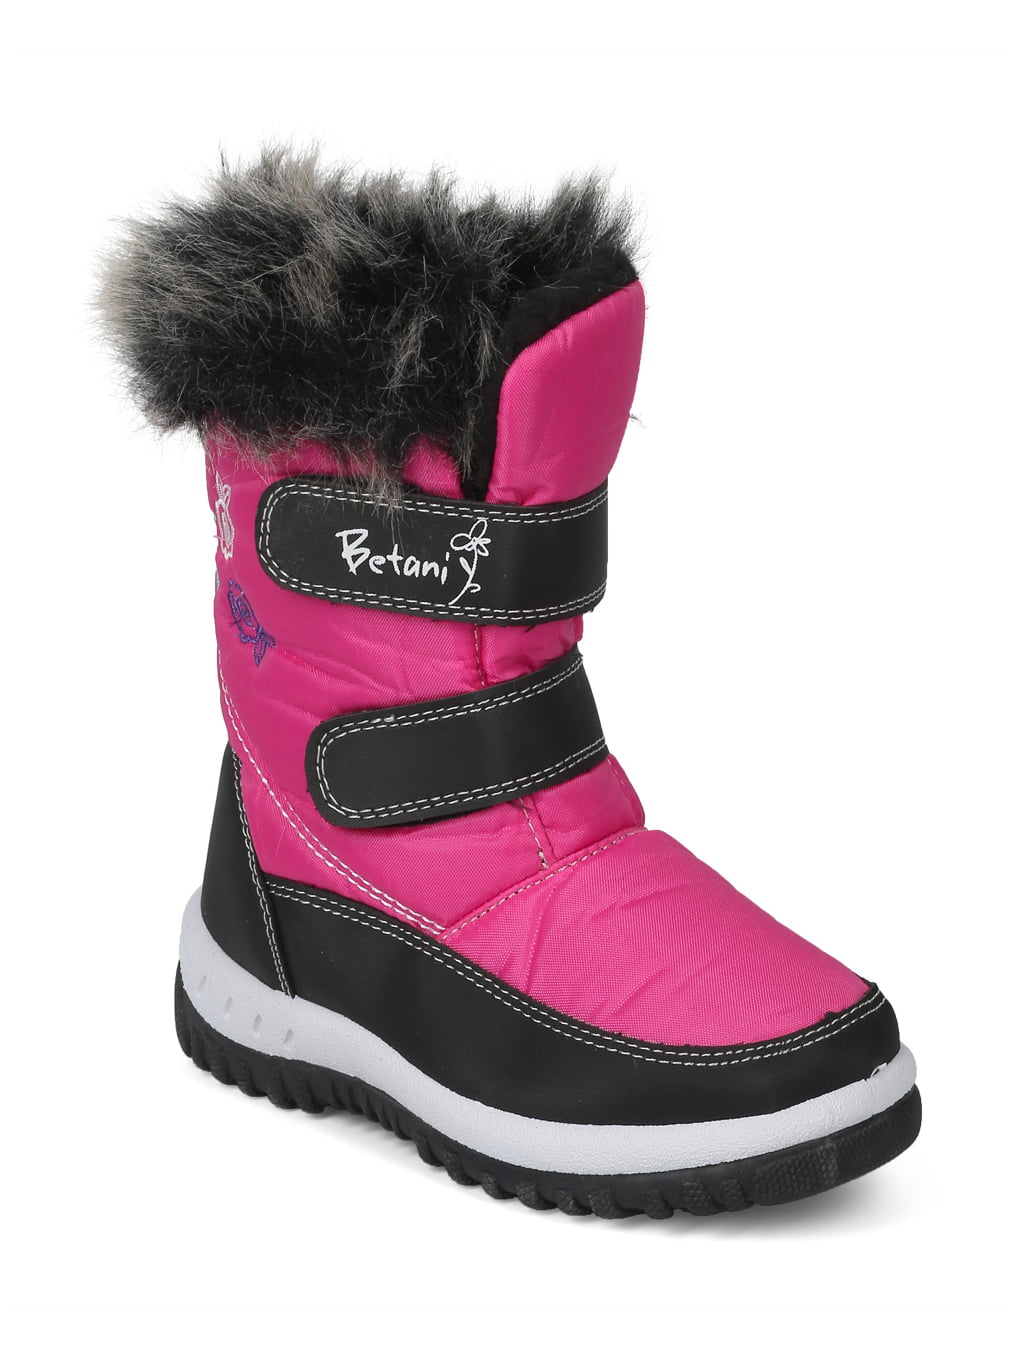 BETANI Kids Girls Winter Boots Size 2 Warm Colorful Snow Boots Tia-4